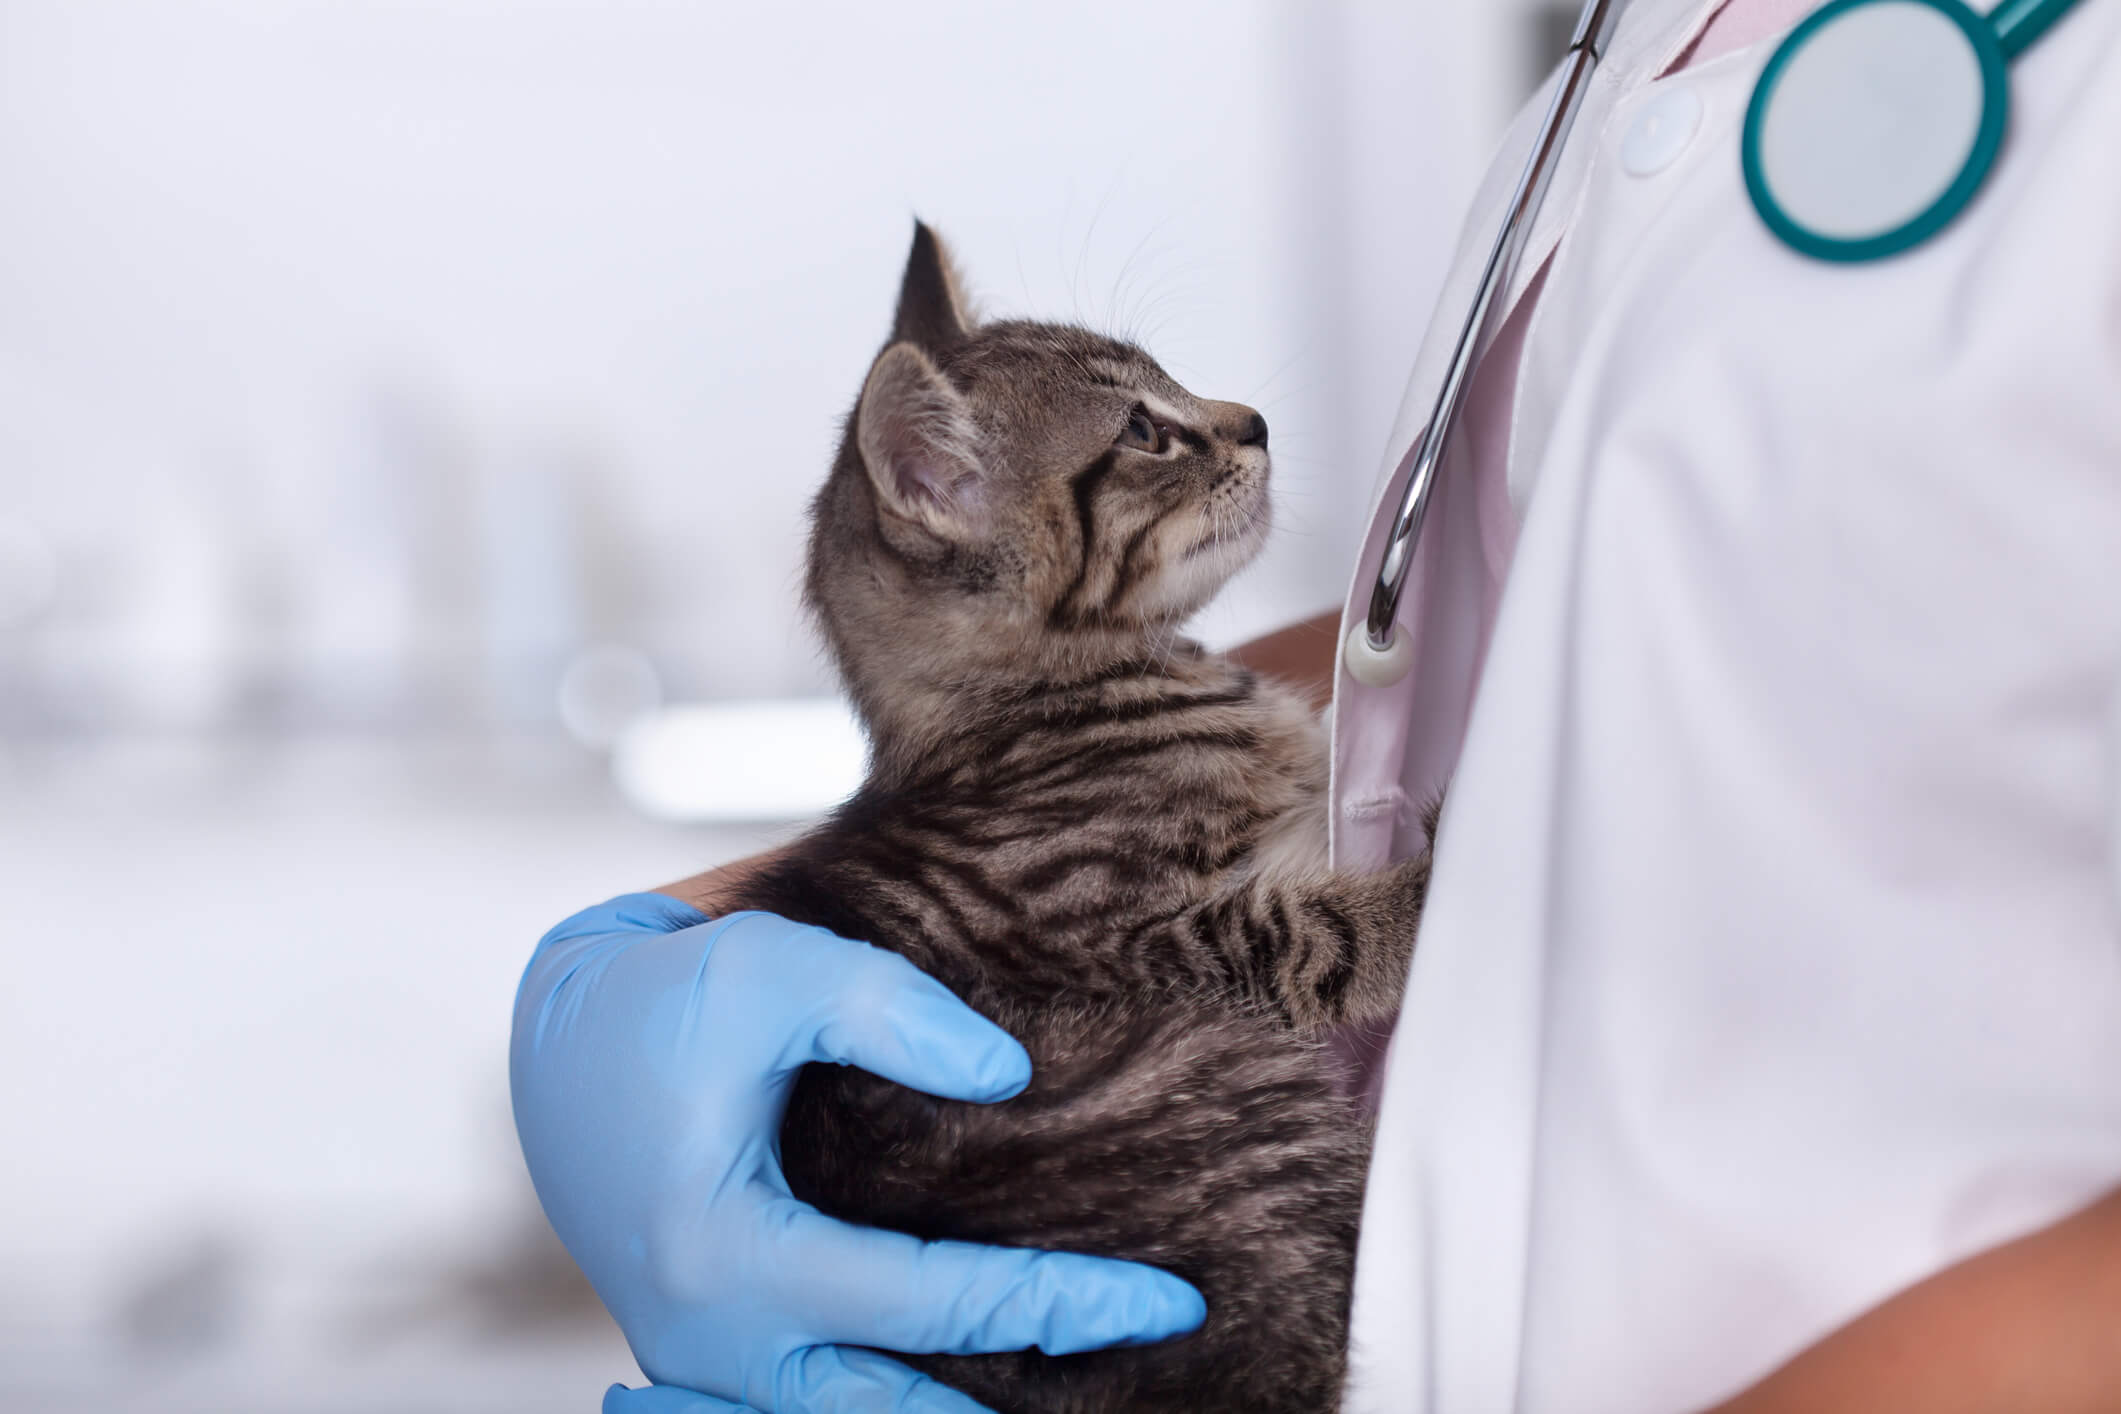 Veterinarian taking care of kitten according to privacy guidelines.